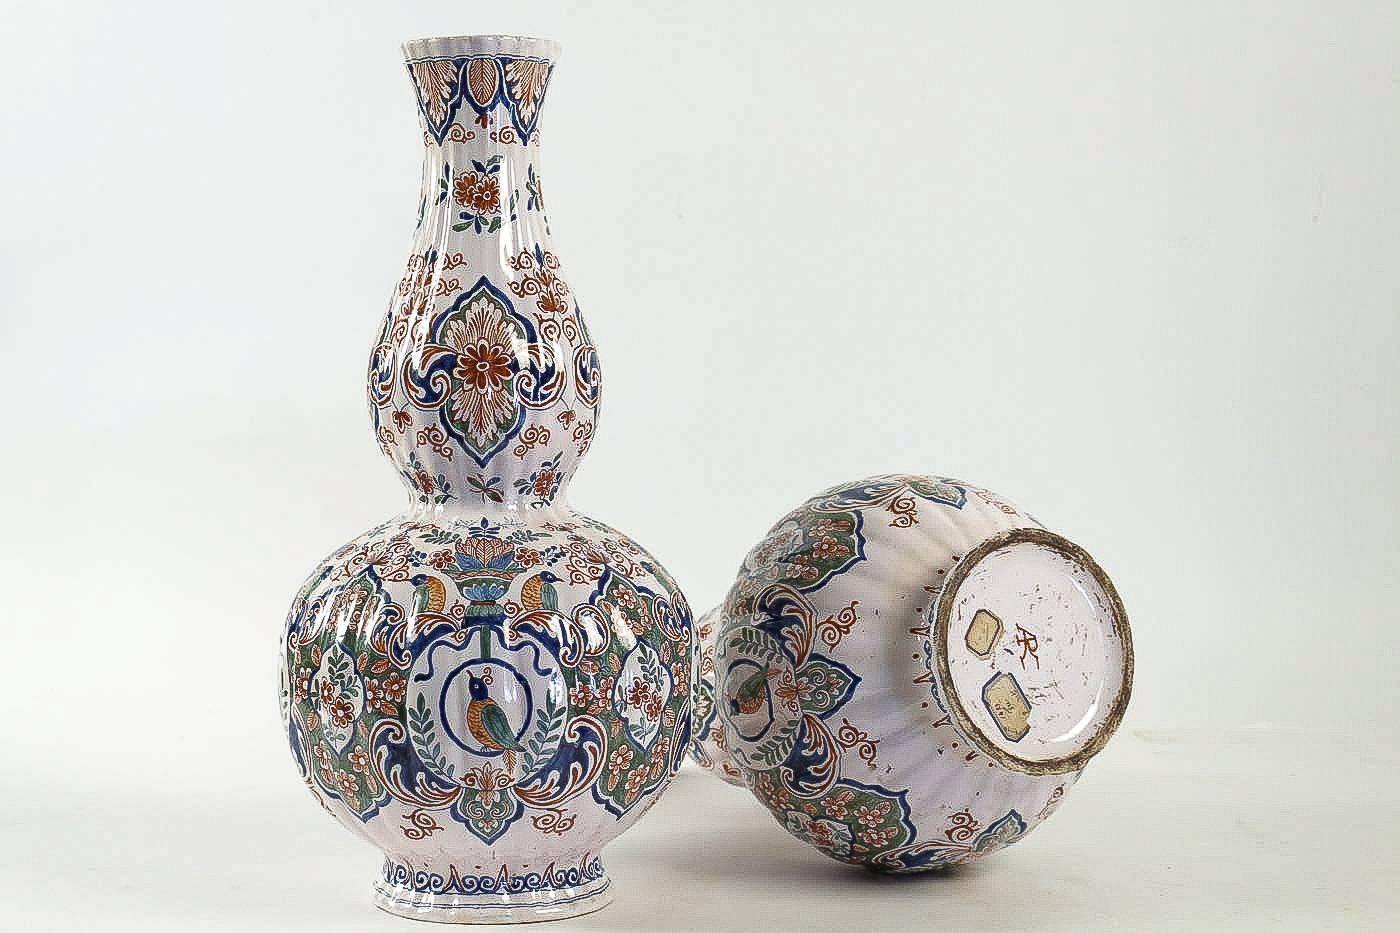 Dutch Early-18th Century, Polychrome Delft Faience Pair of Gourd-Shaped Vases 7